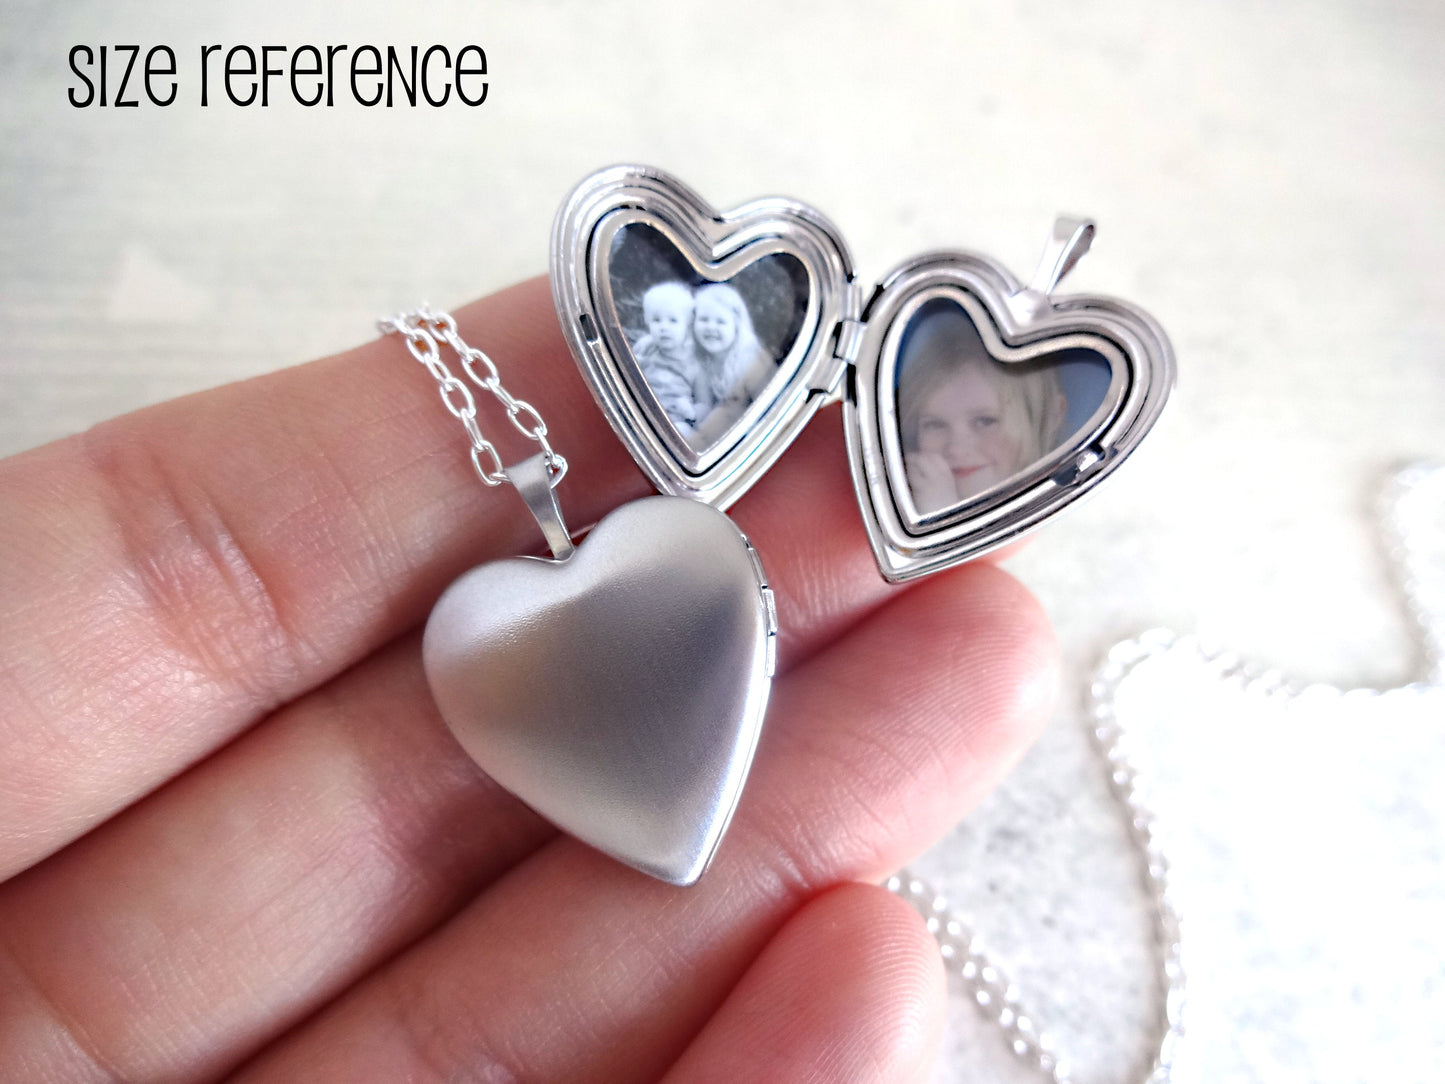 Custom Photo Heart Locket 925 Sterling Silver w/ optional Engraving on Front and Back - Picture Charm Necklace -  In Memory Memorial Jewelry